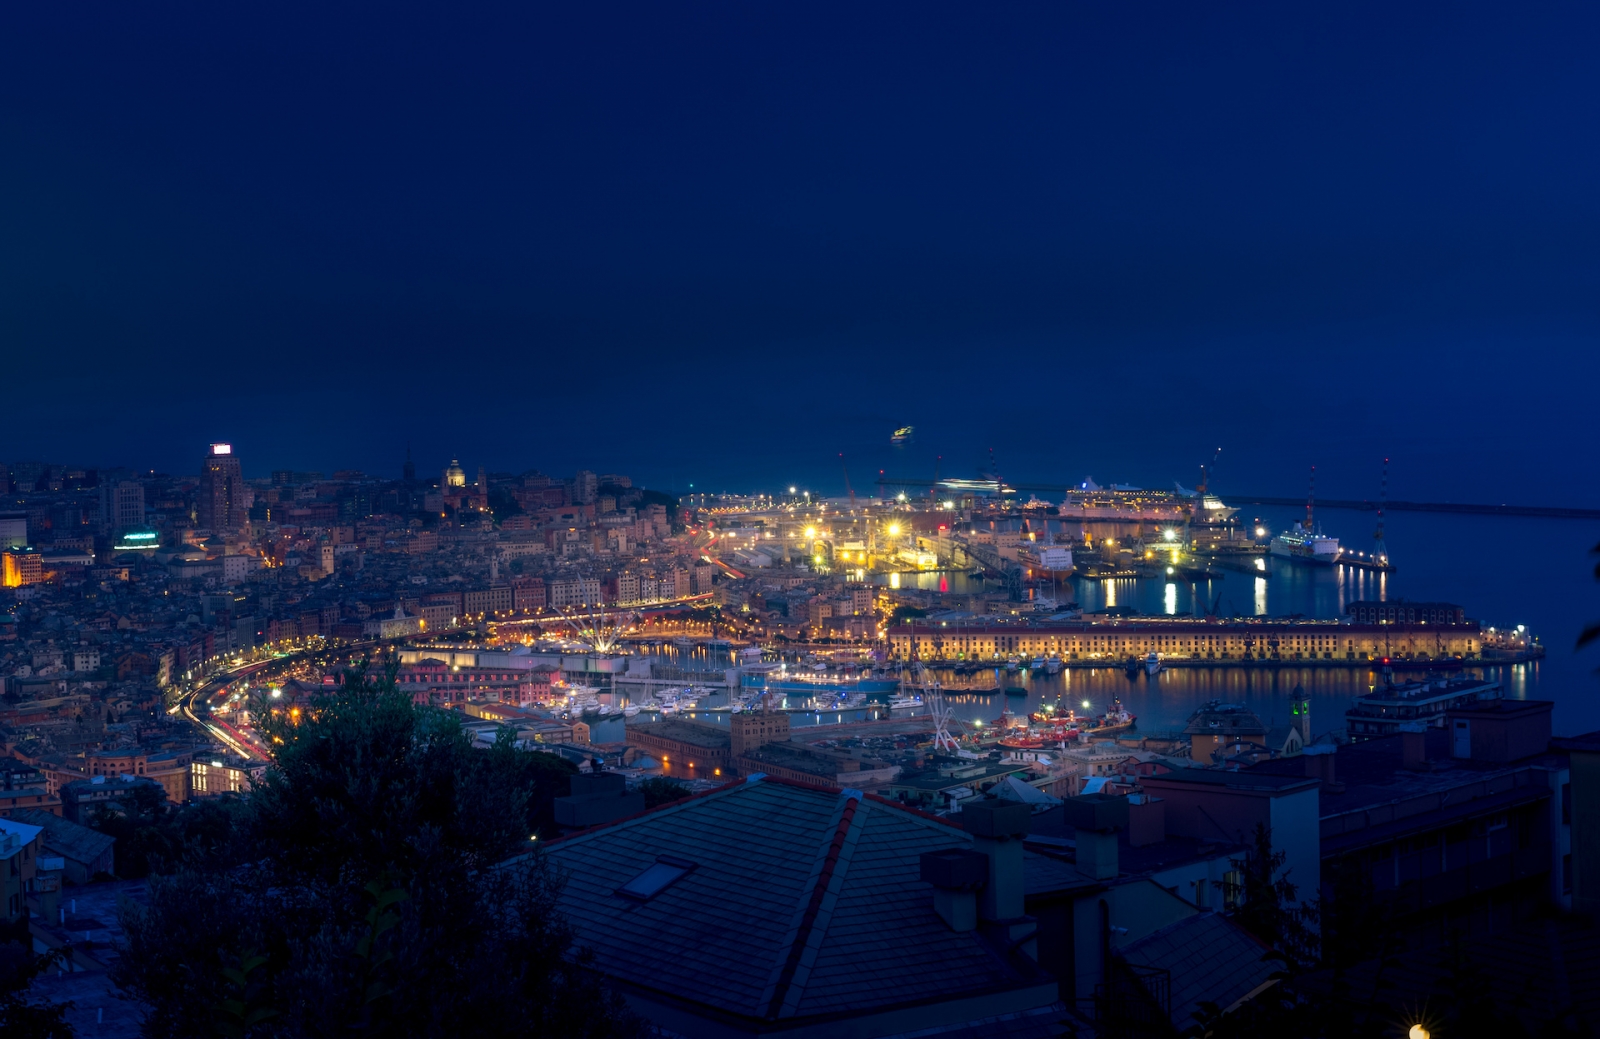 Night cityscape of Genova with the old port, cruise ships, sea and port cranes in the background